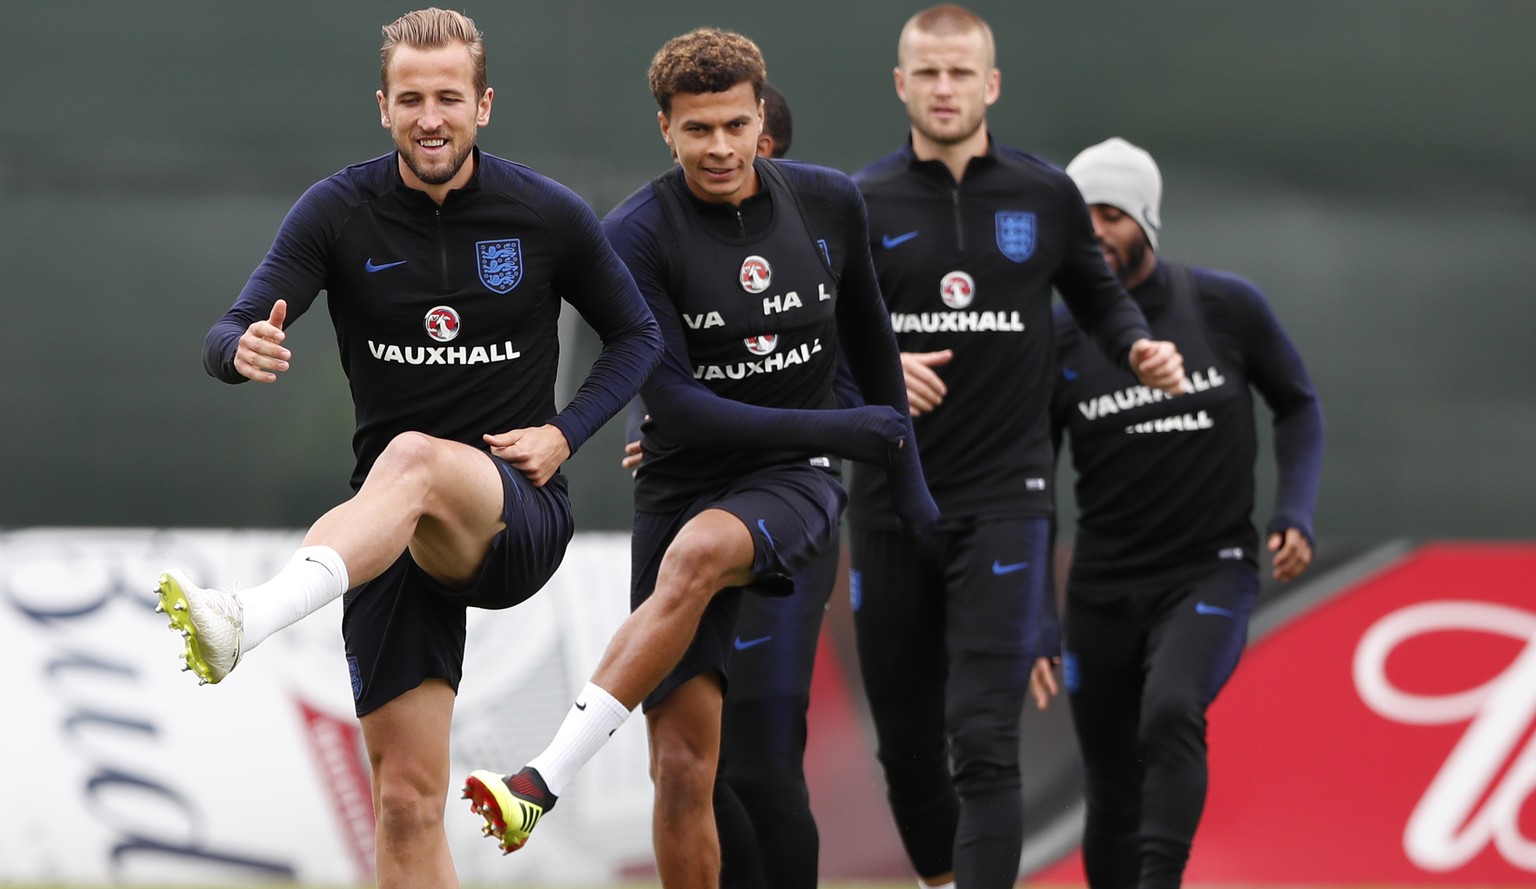 England's Harry Kane, left with England's Dele Alli, second left warm up prior to taking part in a training session for the England team at the 2018 soccer World Cup, in the Spartak Zelenogorsk ground ...